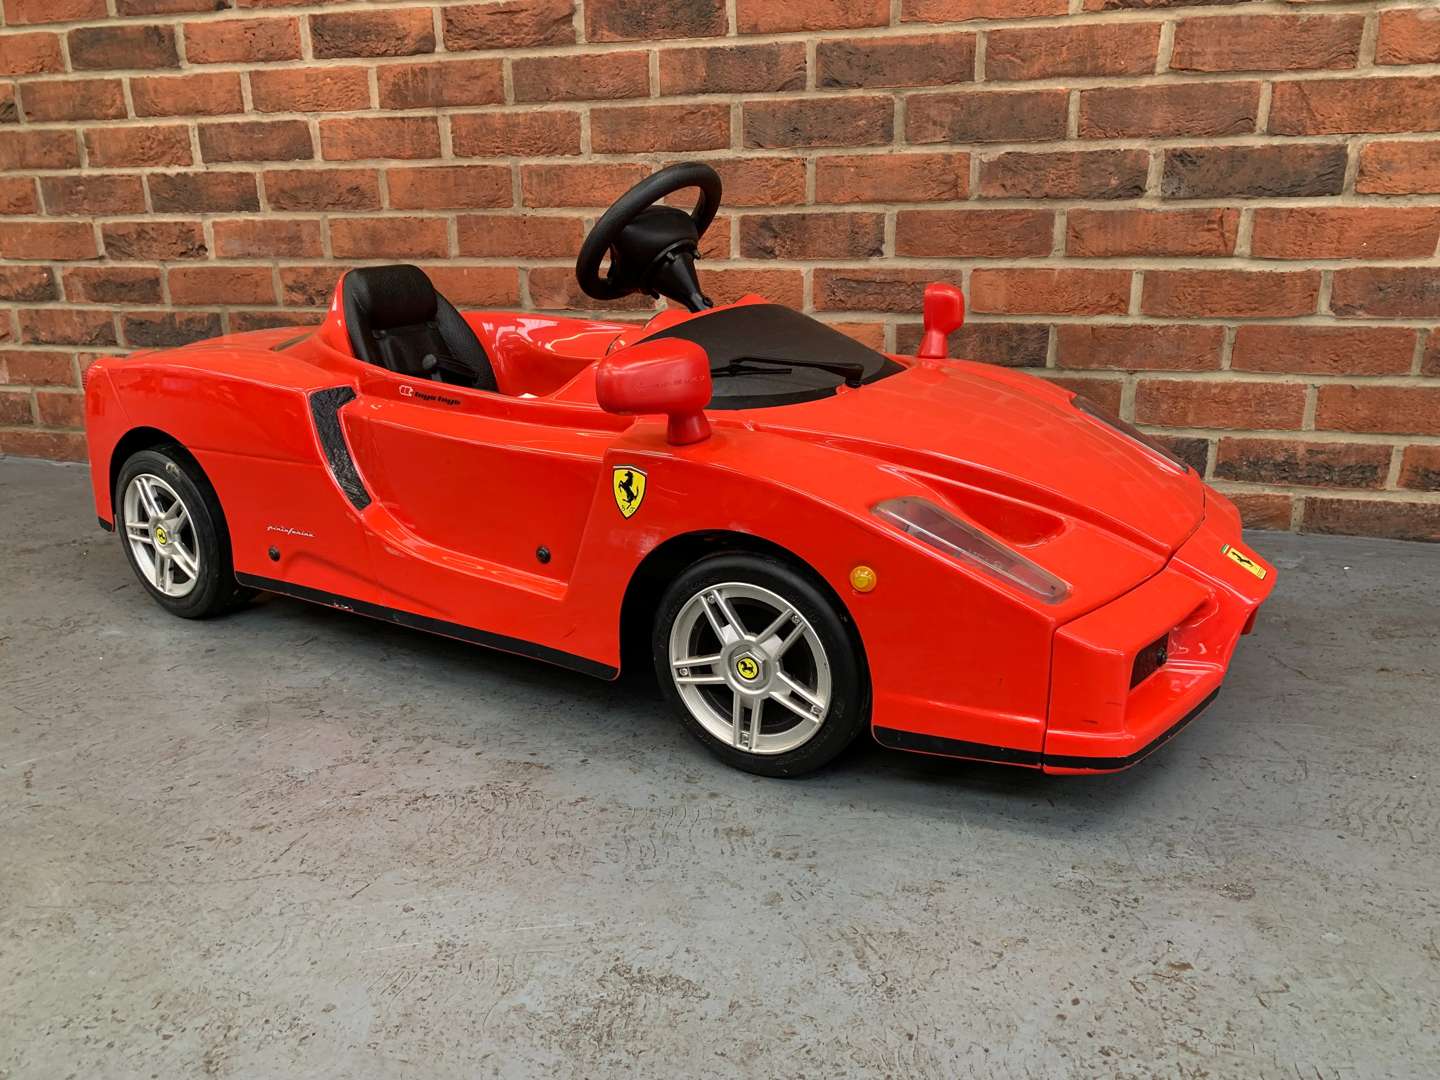 Toys Toys Battery Operated Childs Ferrari Enzo Car - Image 2 of 6